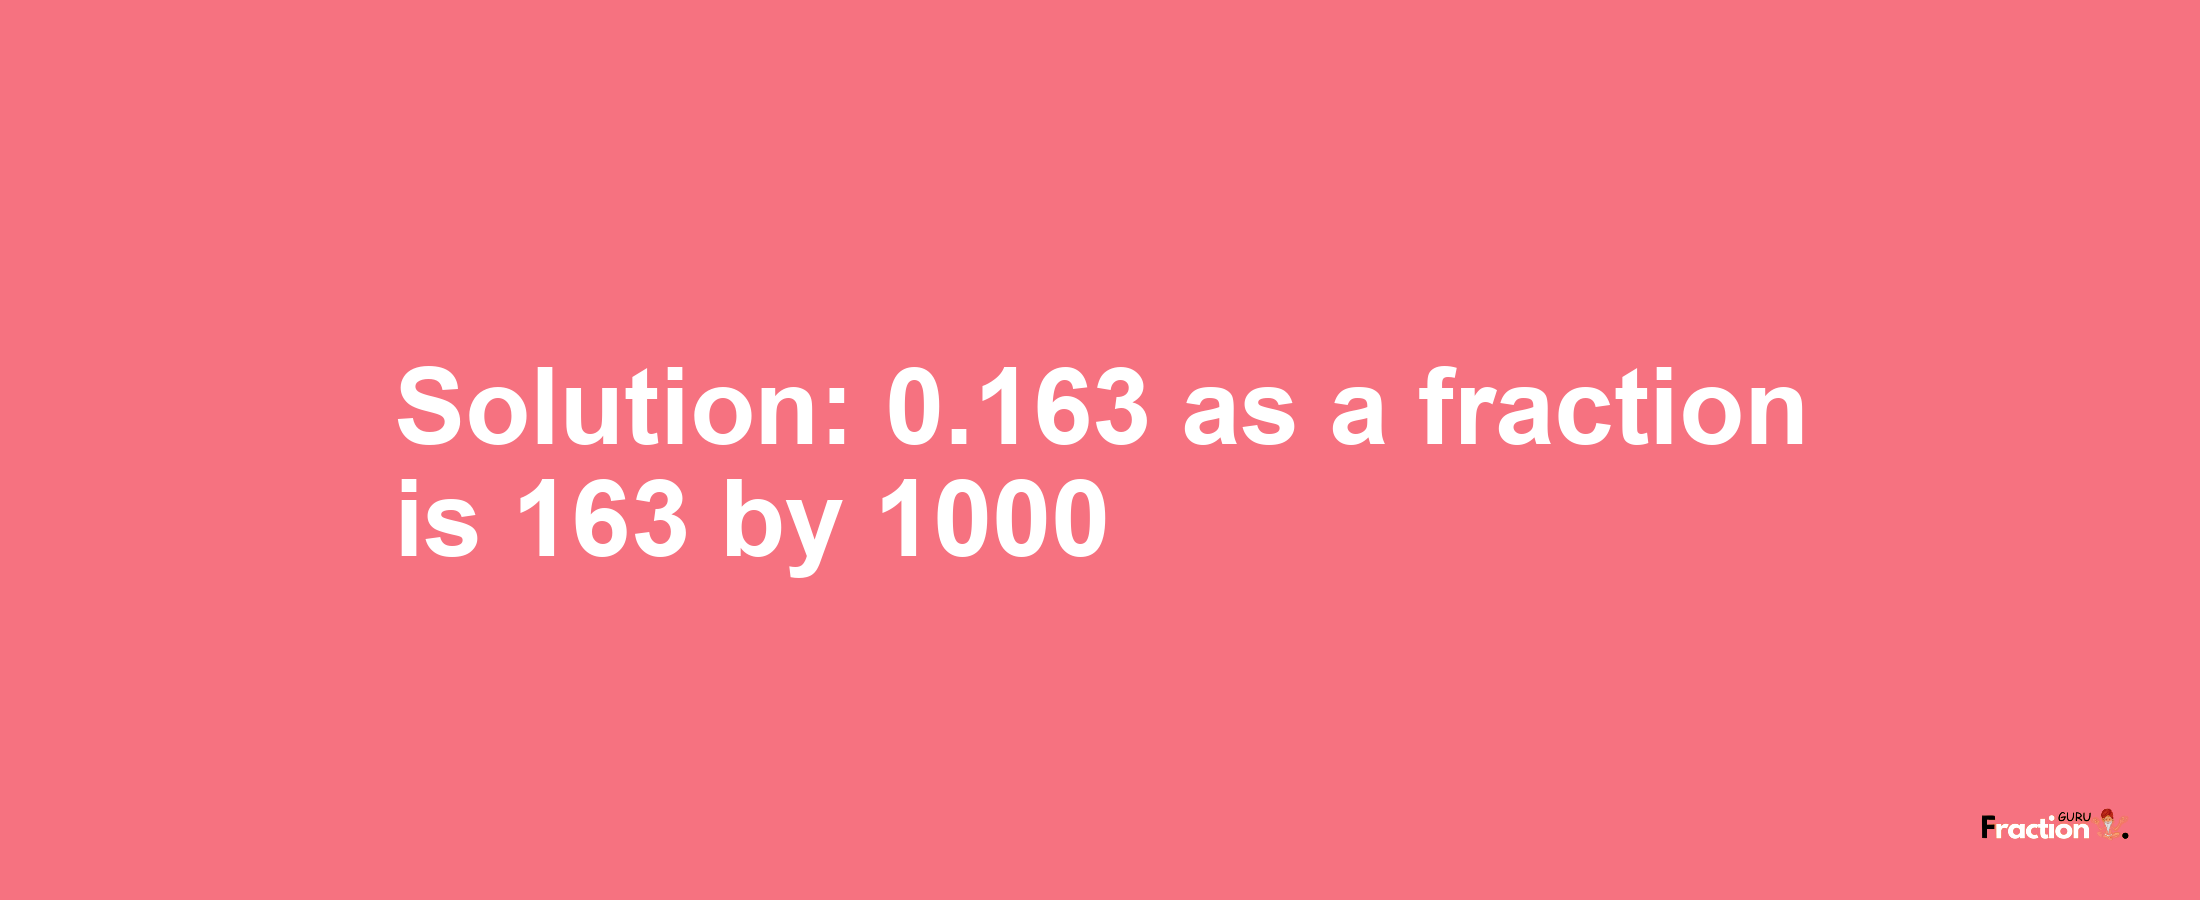 Solution:0.163 as a fraction is 163/1000